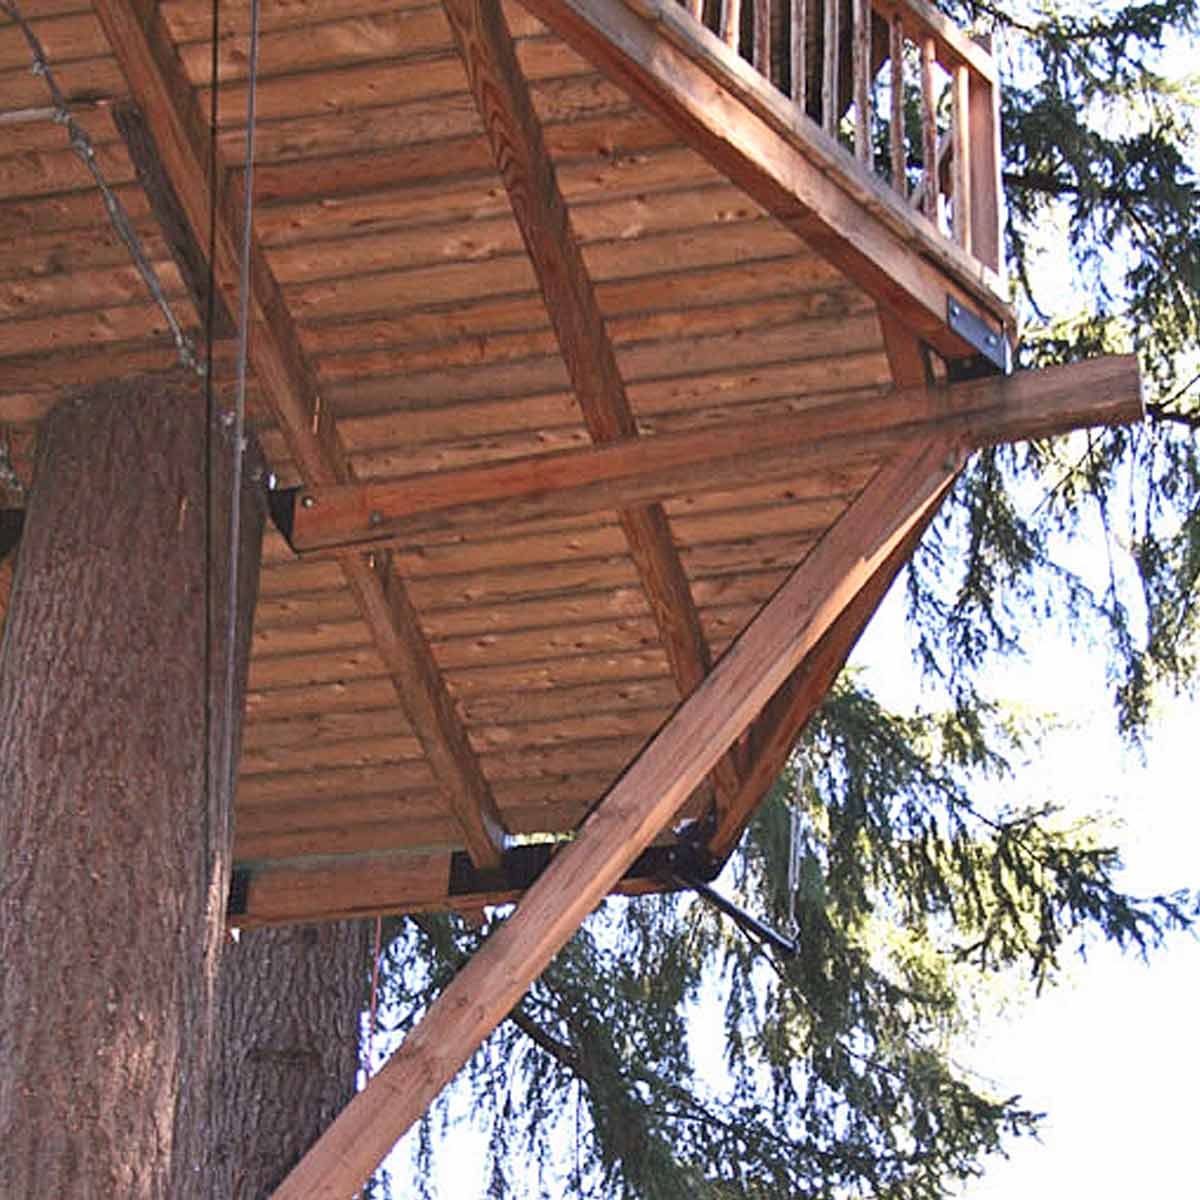 Be conscious of tree house safety issues